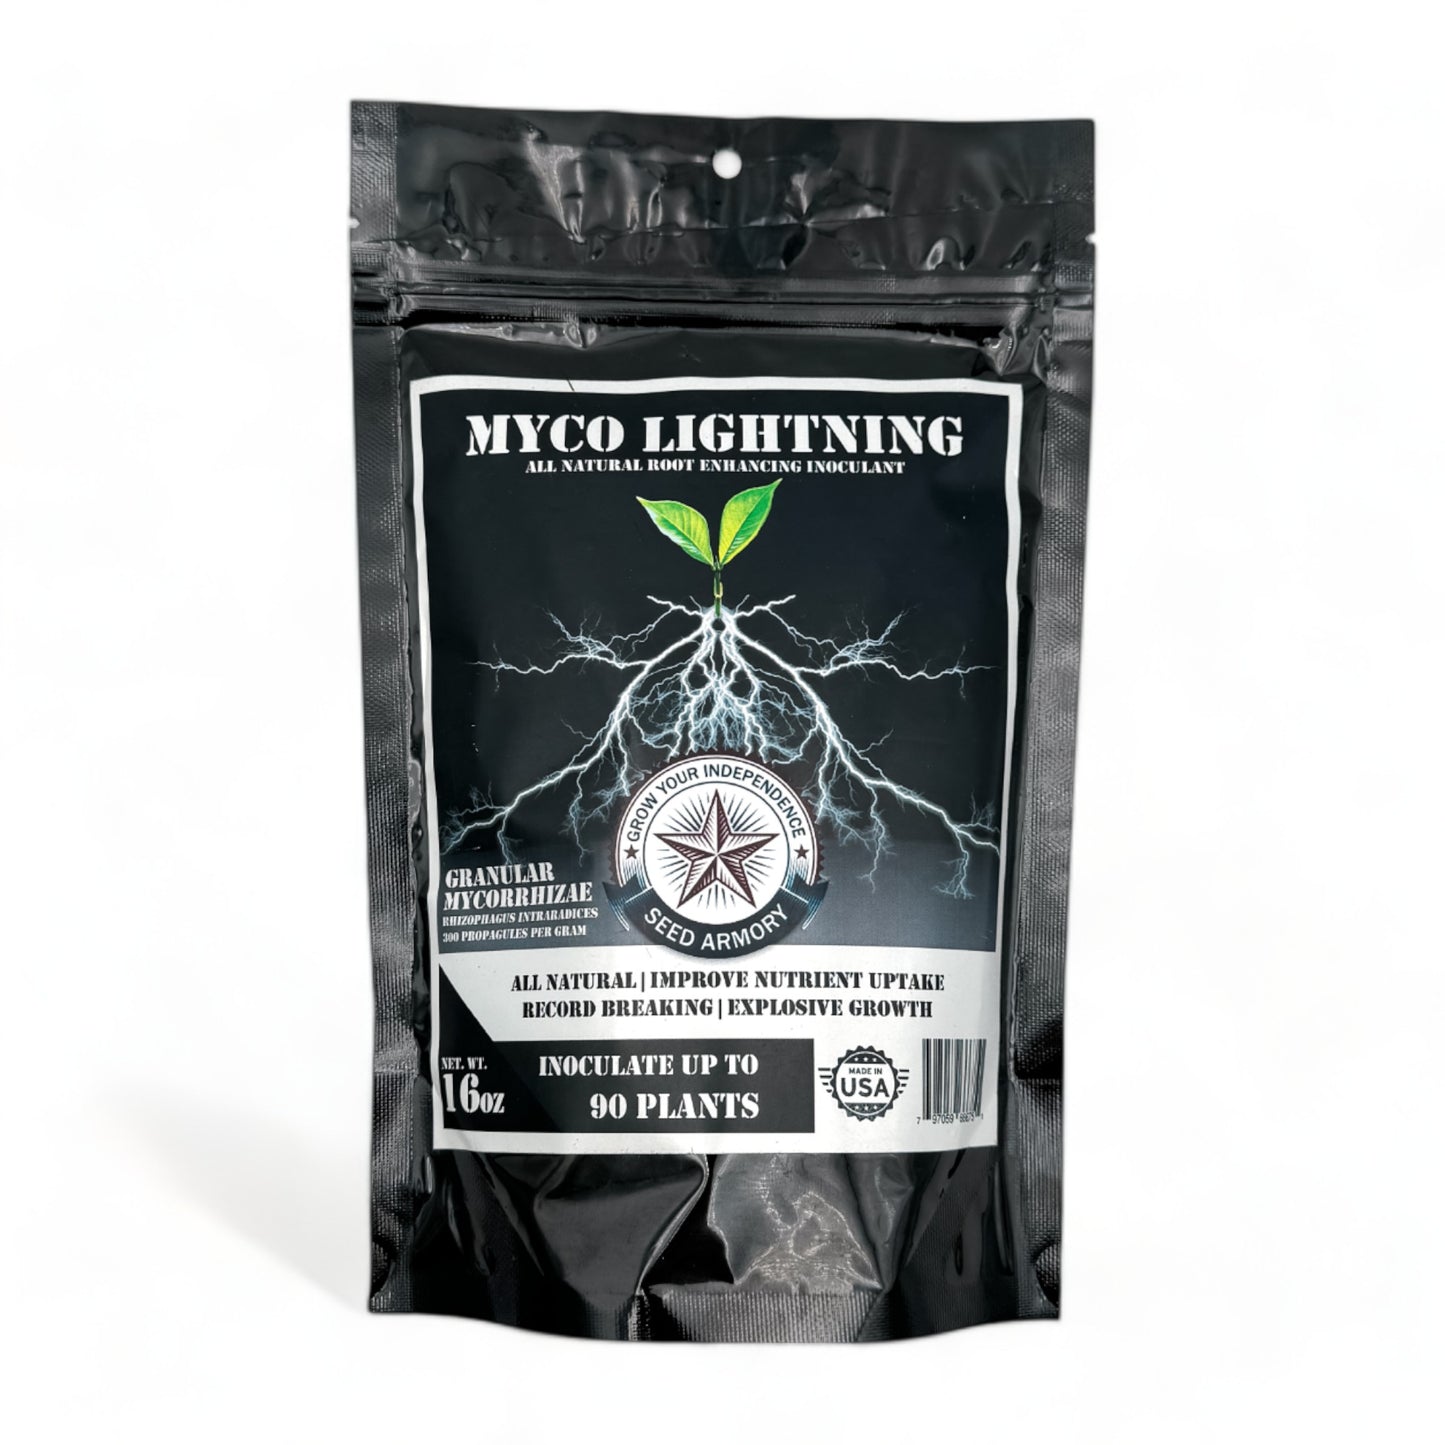 Myco Lightning product front packaging on a plain background